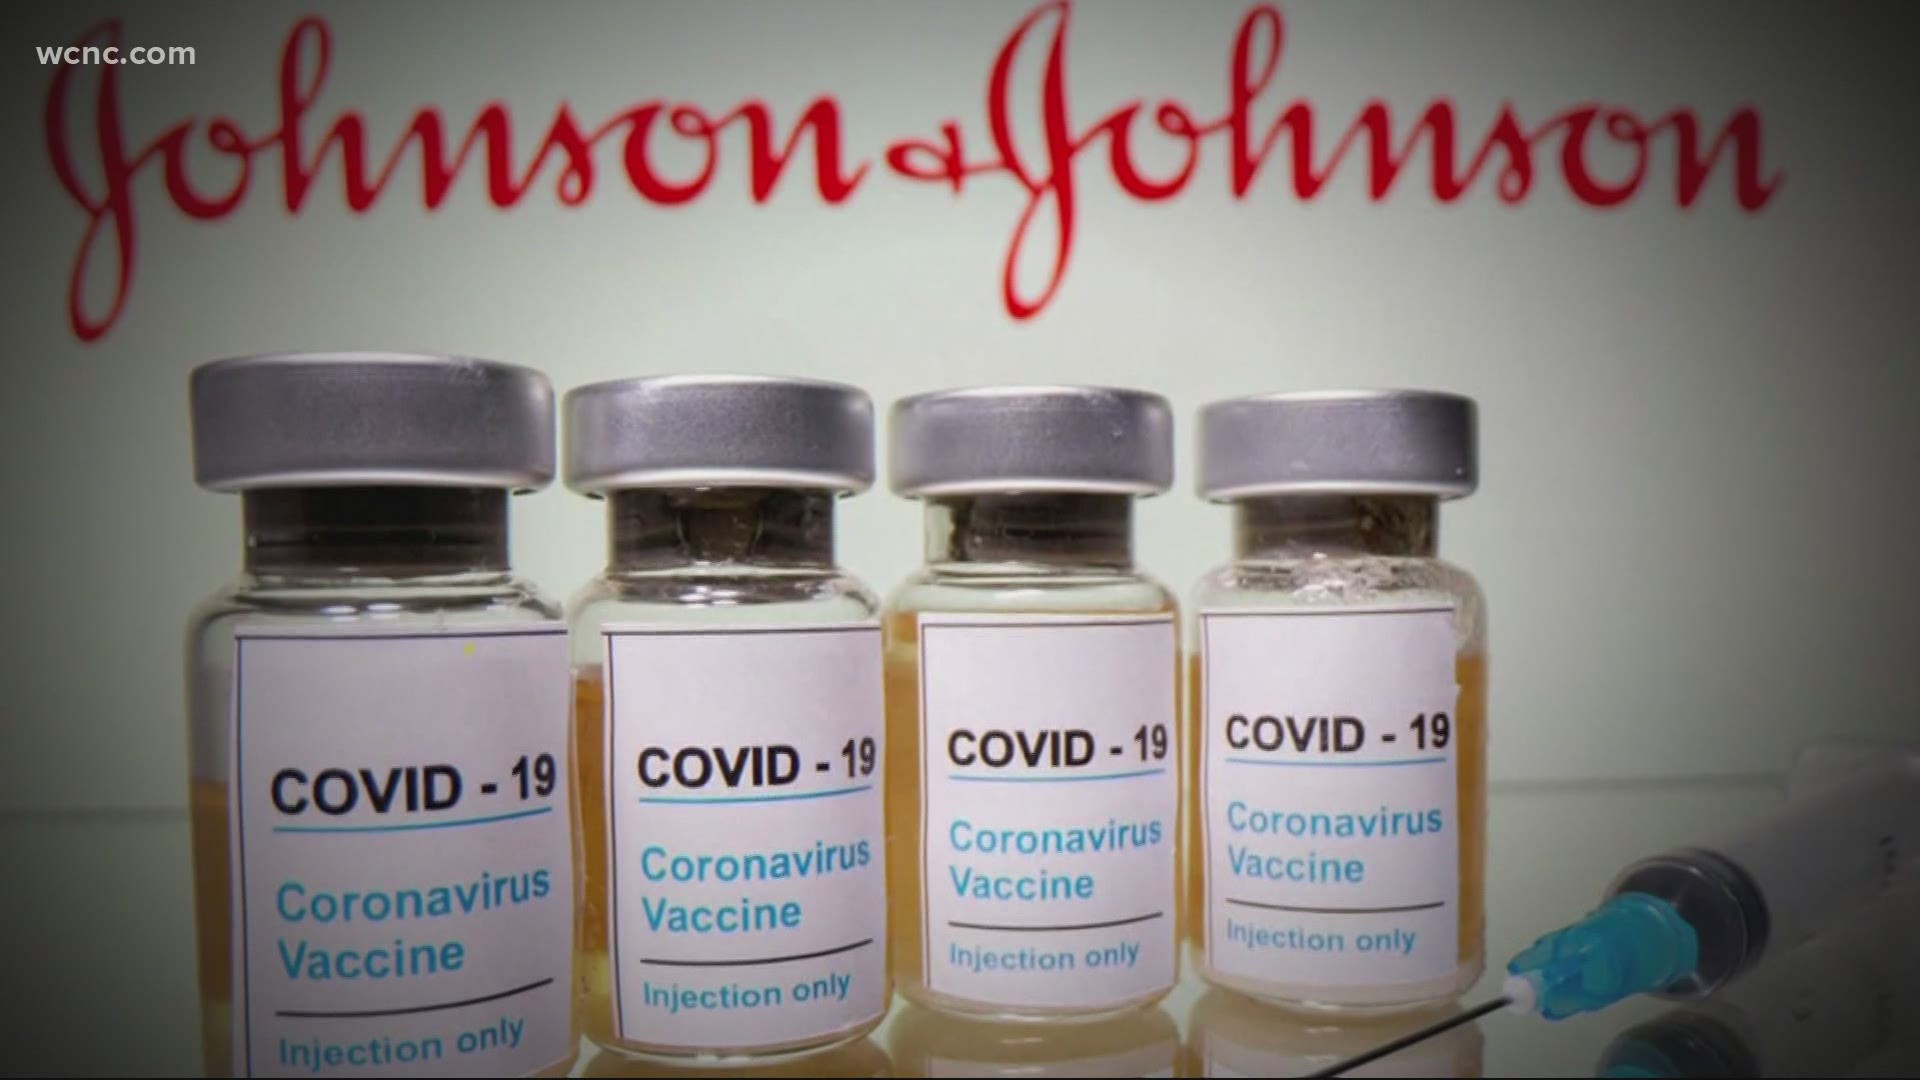 Despite encouragement from health leaders, questions about the single-dose COVID vaccine remain.